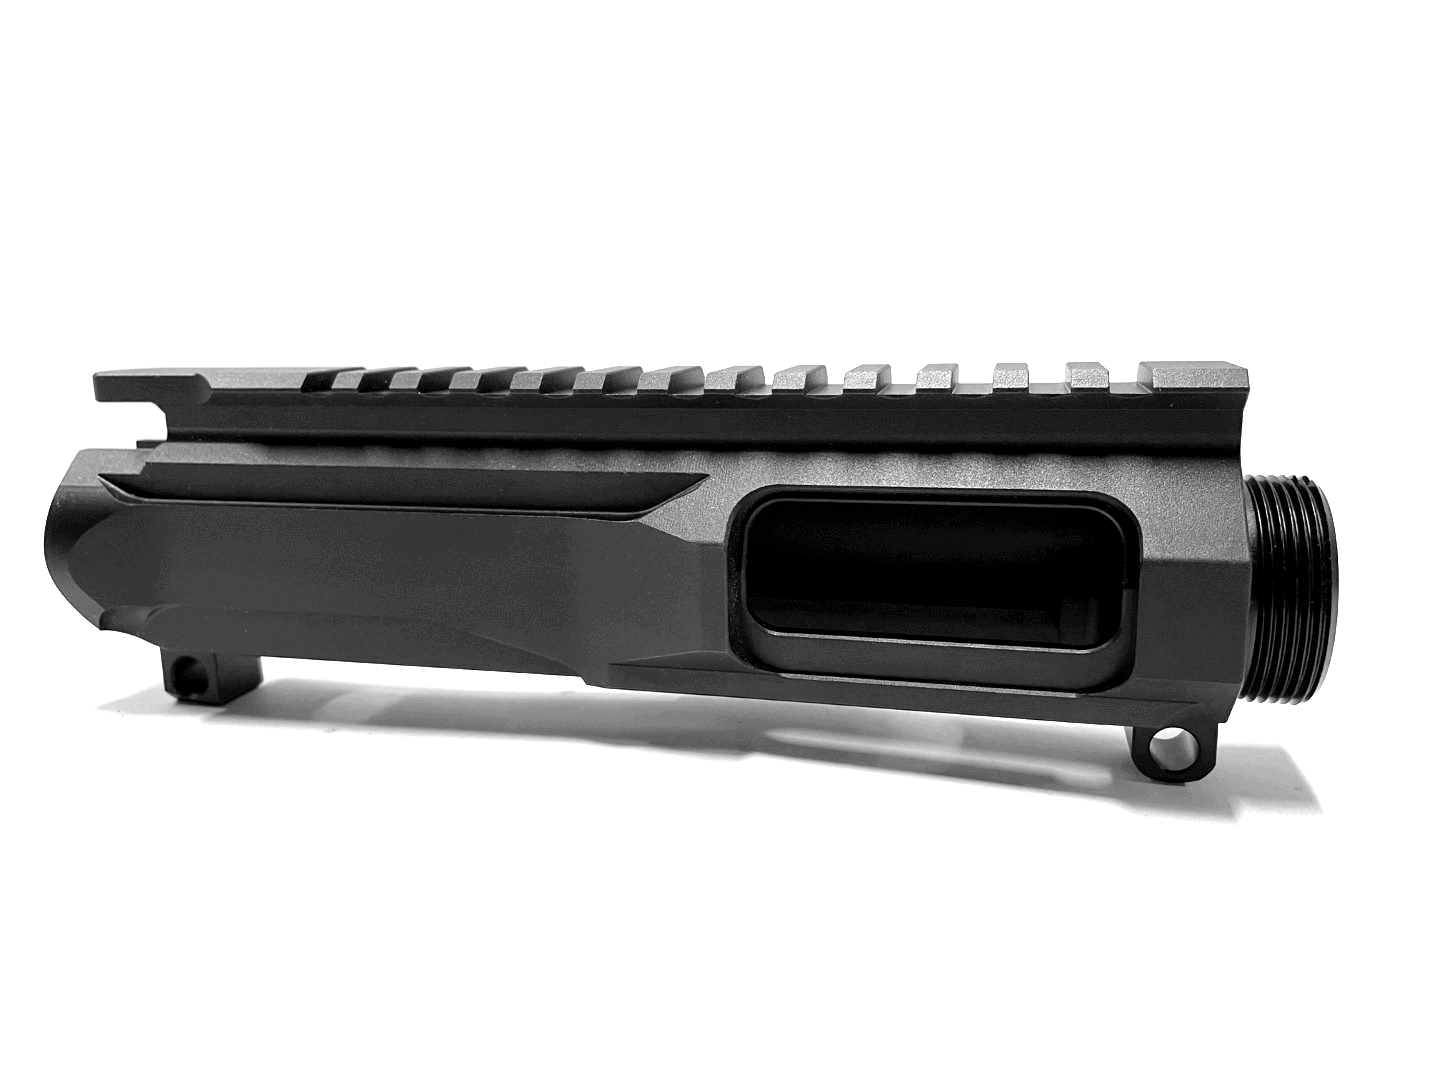 AR-15/AR-9 STRIPPED UPPER RECEIVER - FOR PISTOL CALIBERS